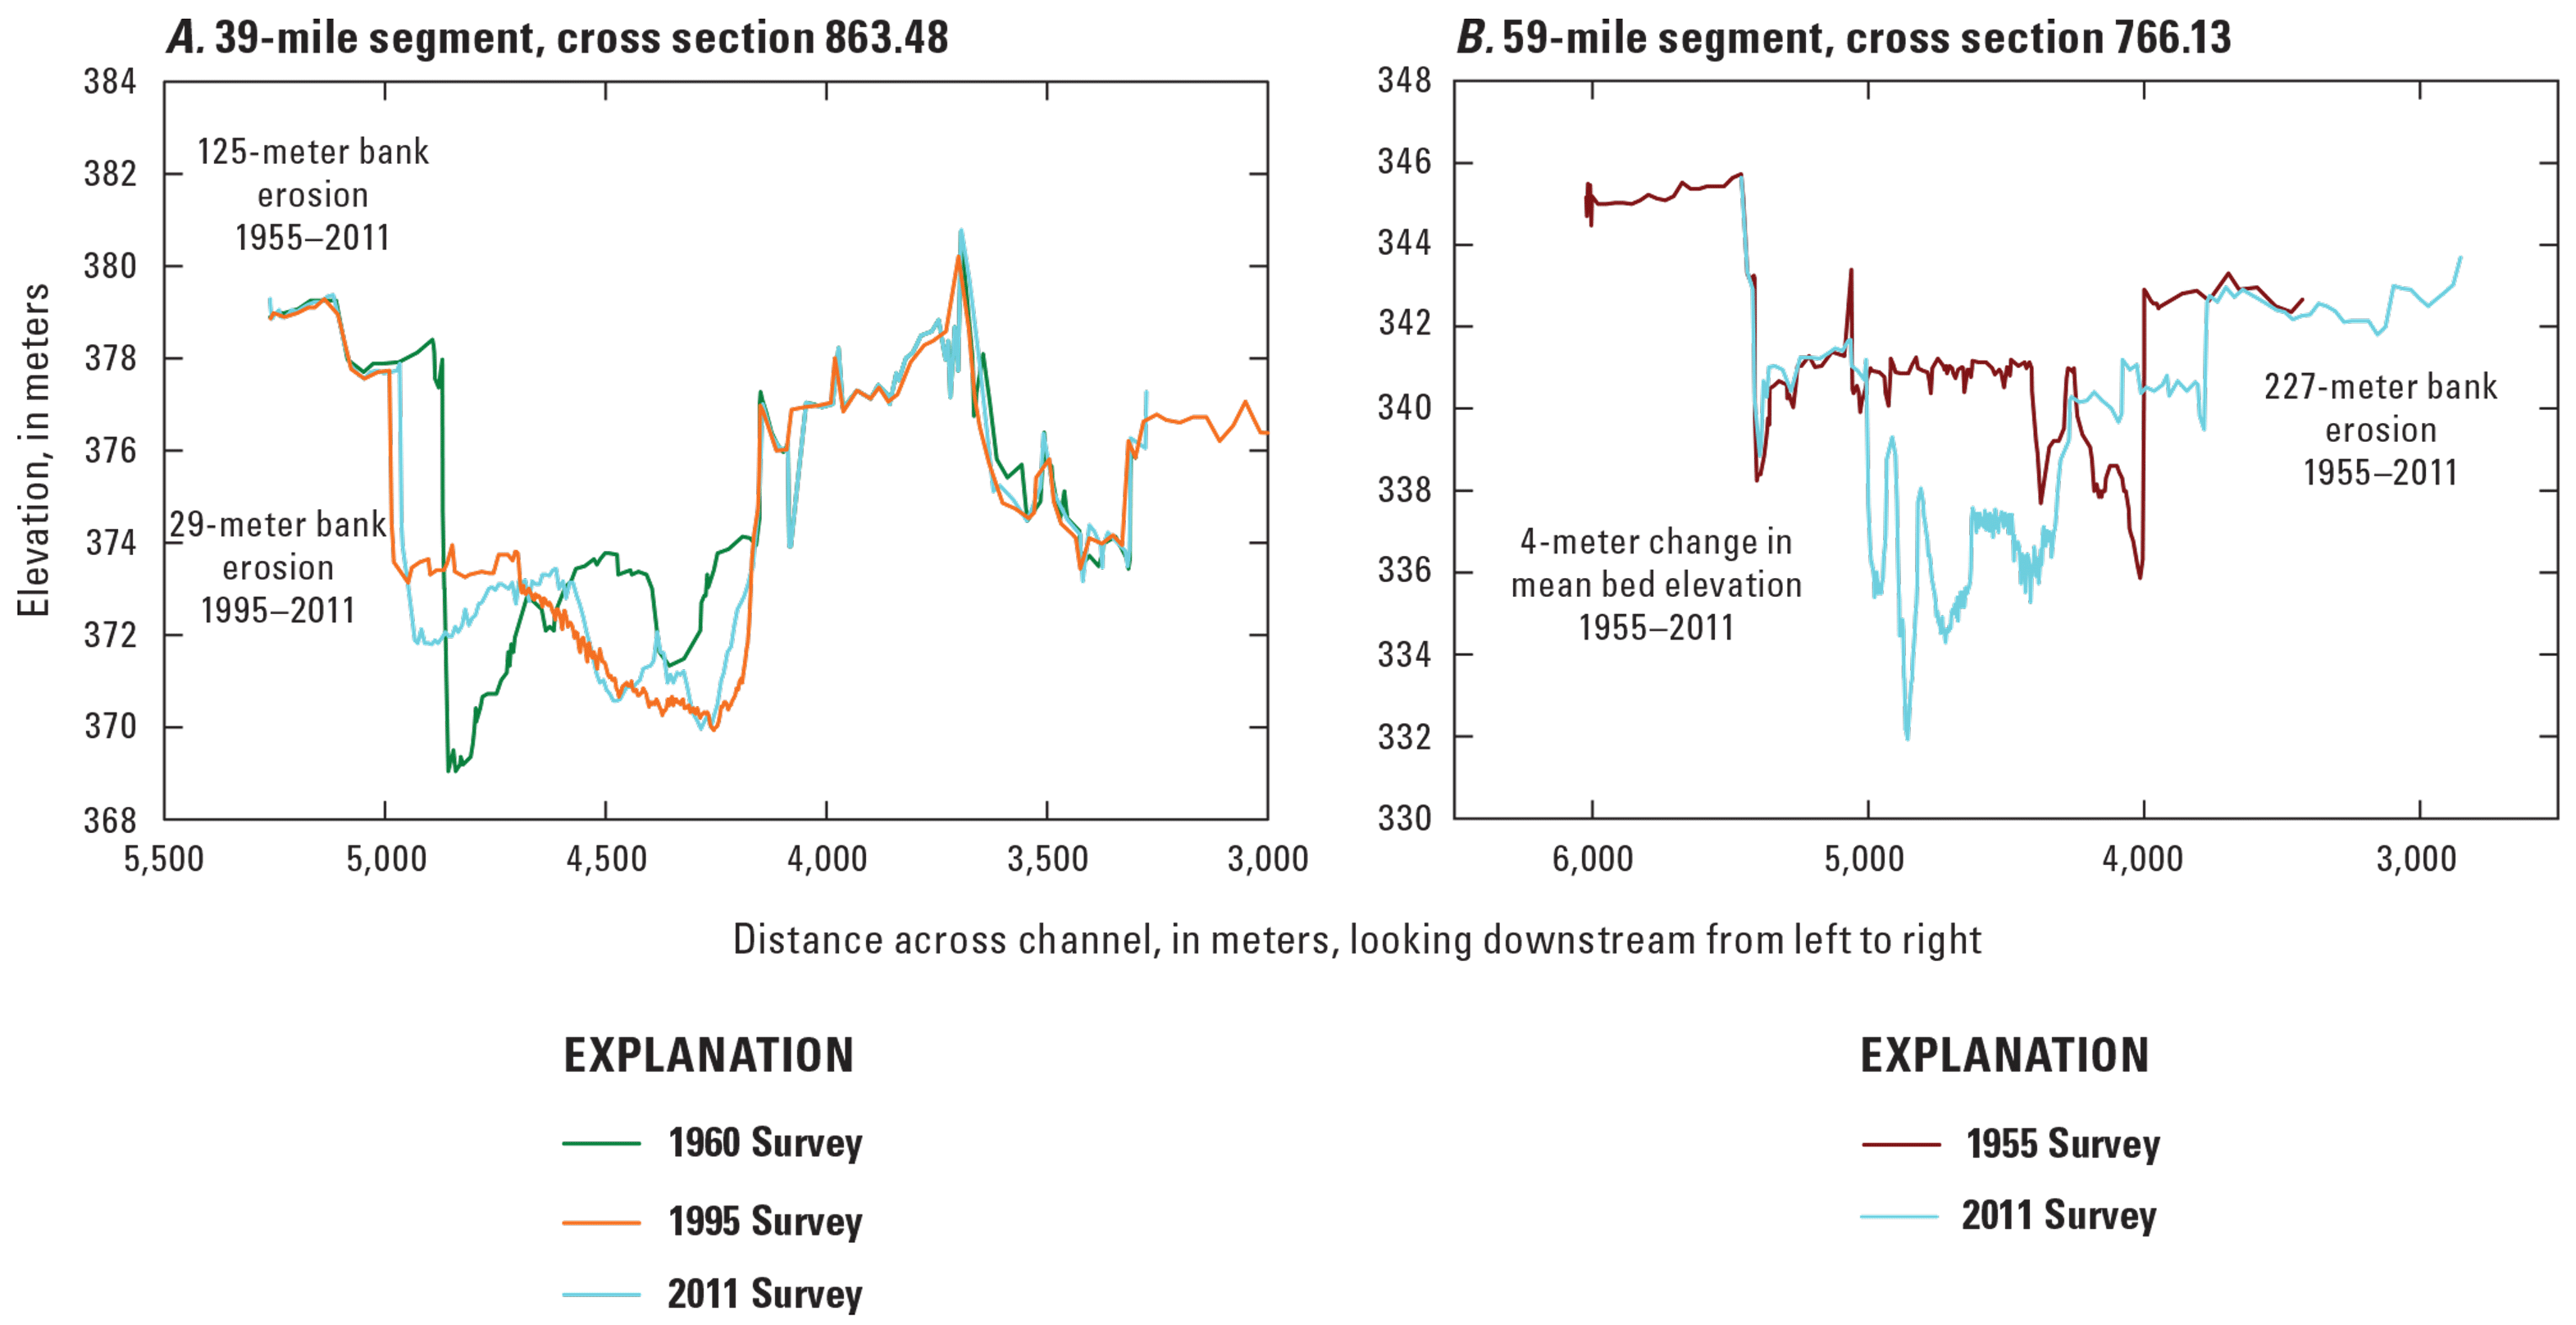 Graphs showing elevation and distance across change for 1955, 1960, and 2010 surveys